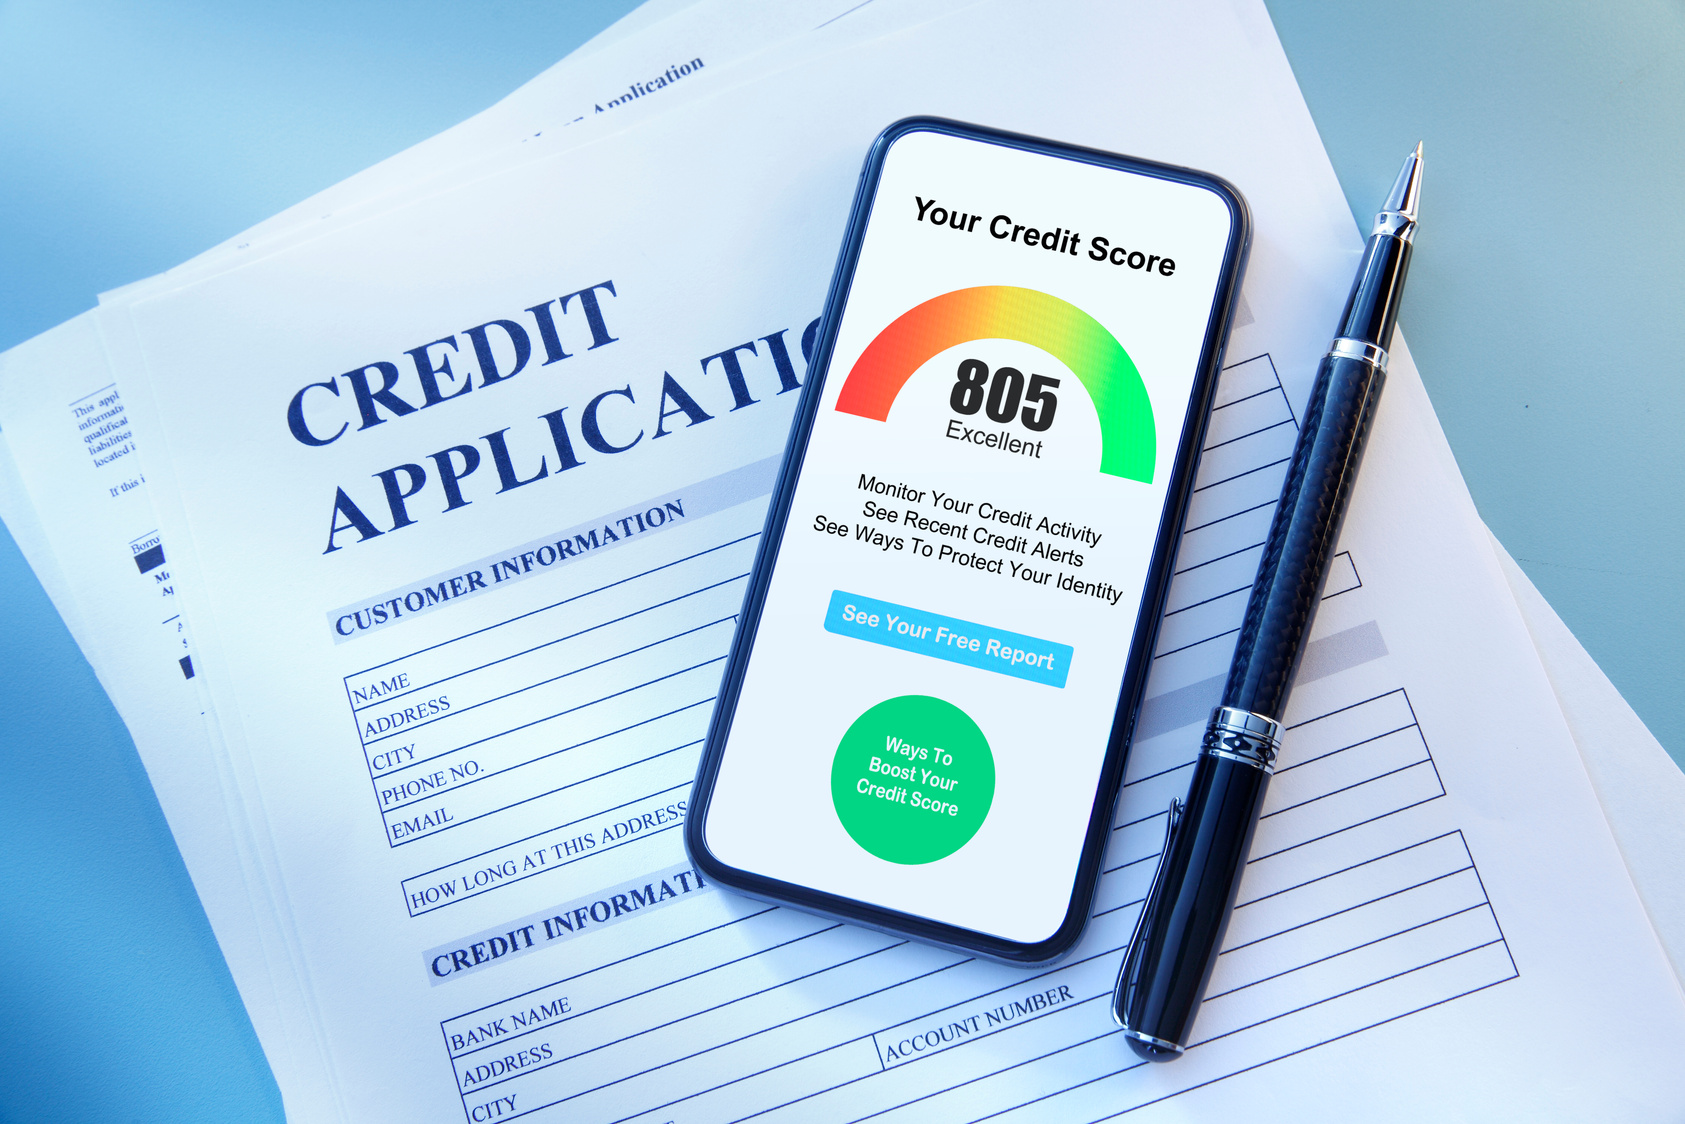 Credit Application And Credit Score